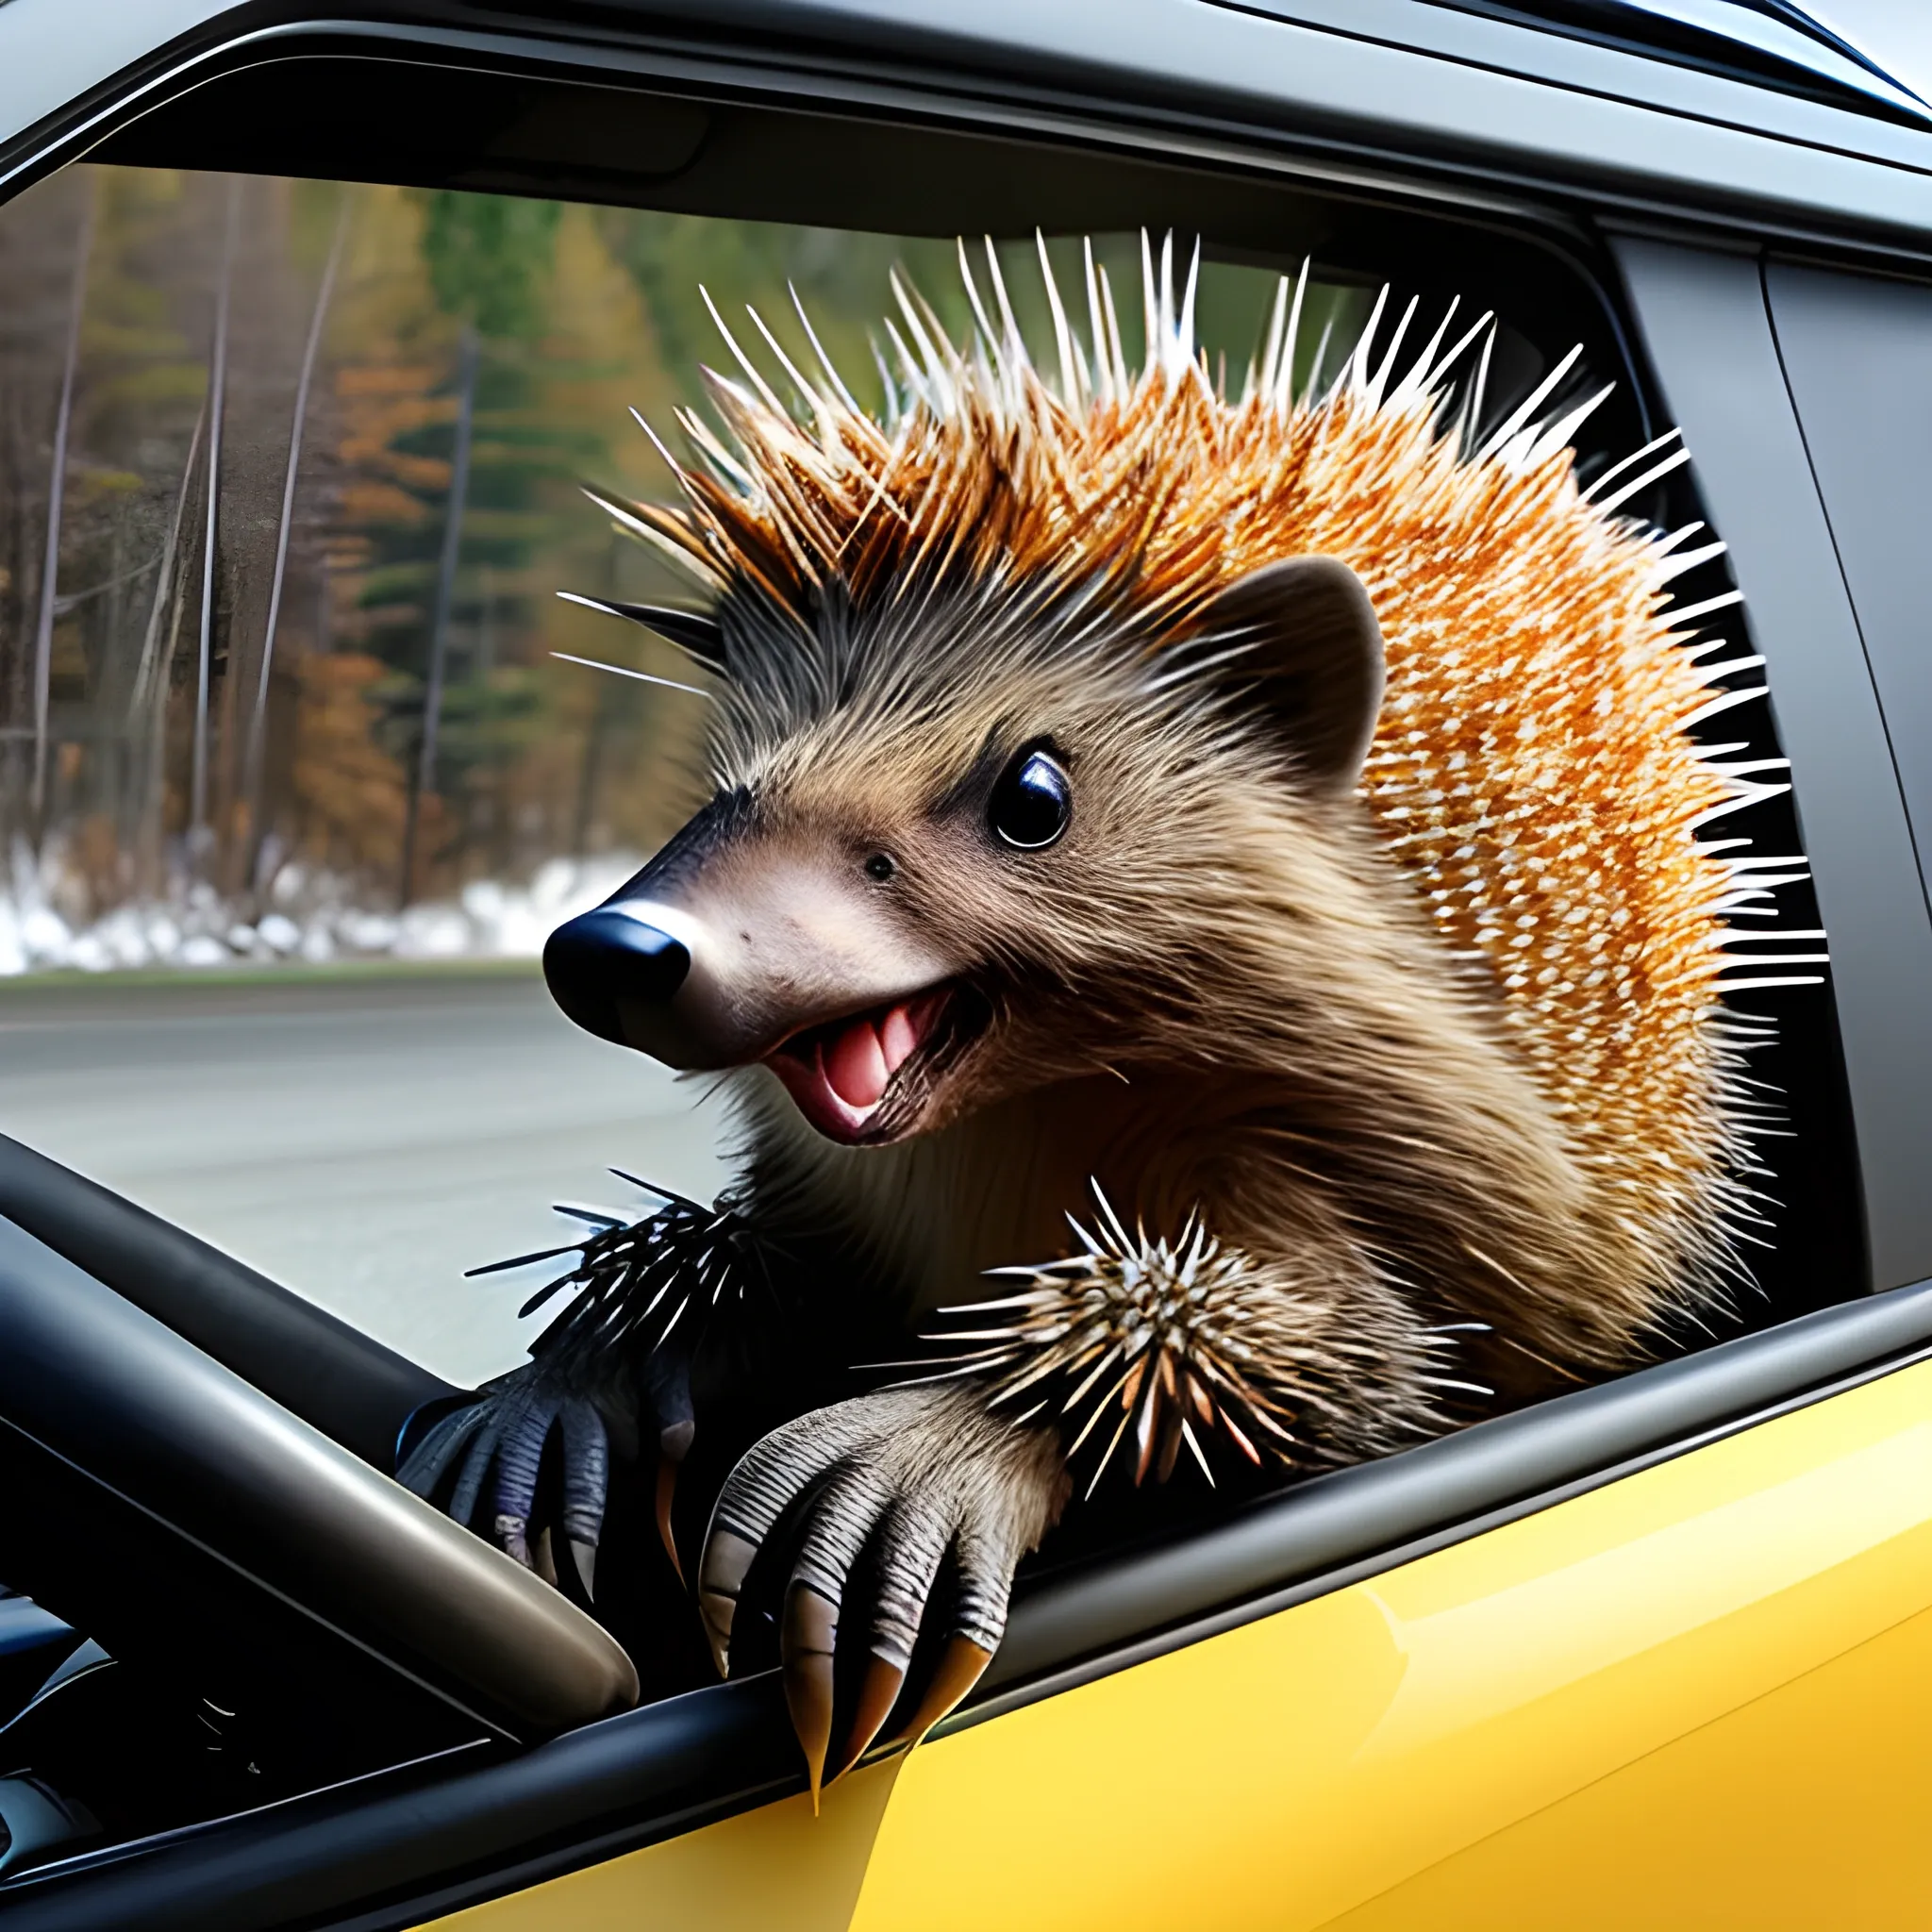 A porcupine driving a car to New Hampshire